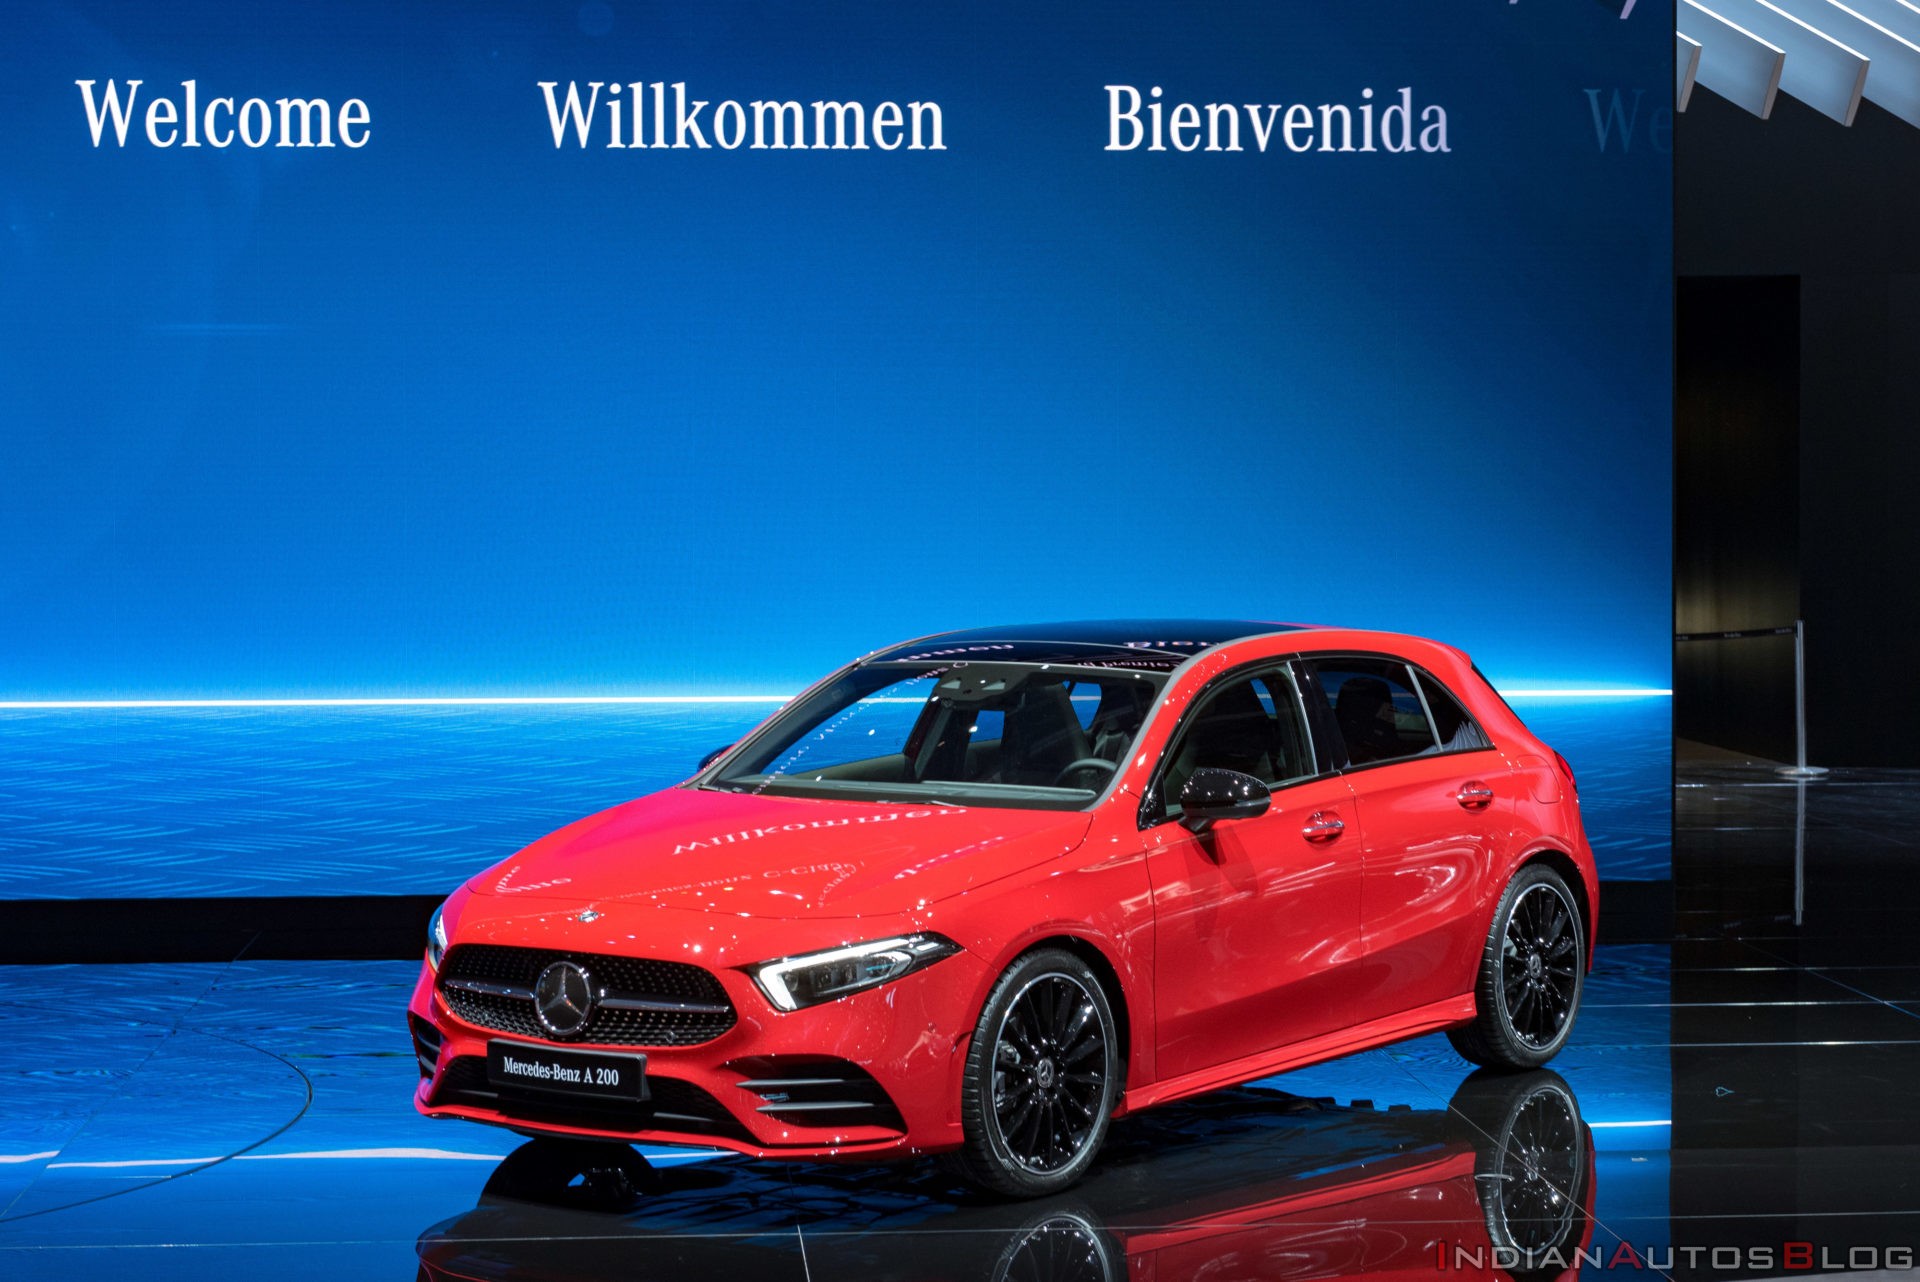 Mercedes Benz Says No To A Class Hatch B Class Cla Relaunch In India